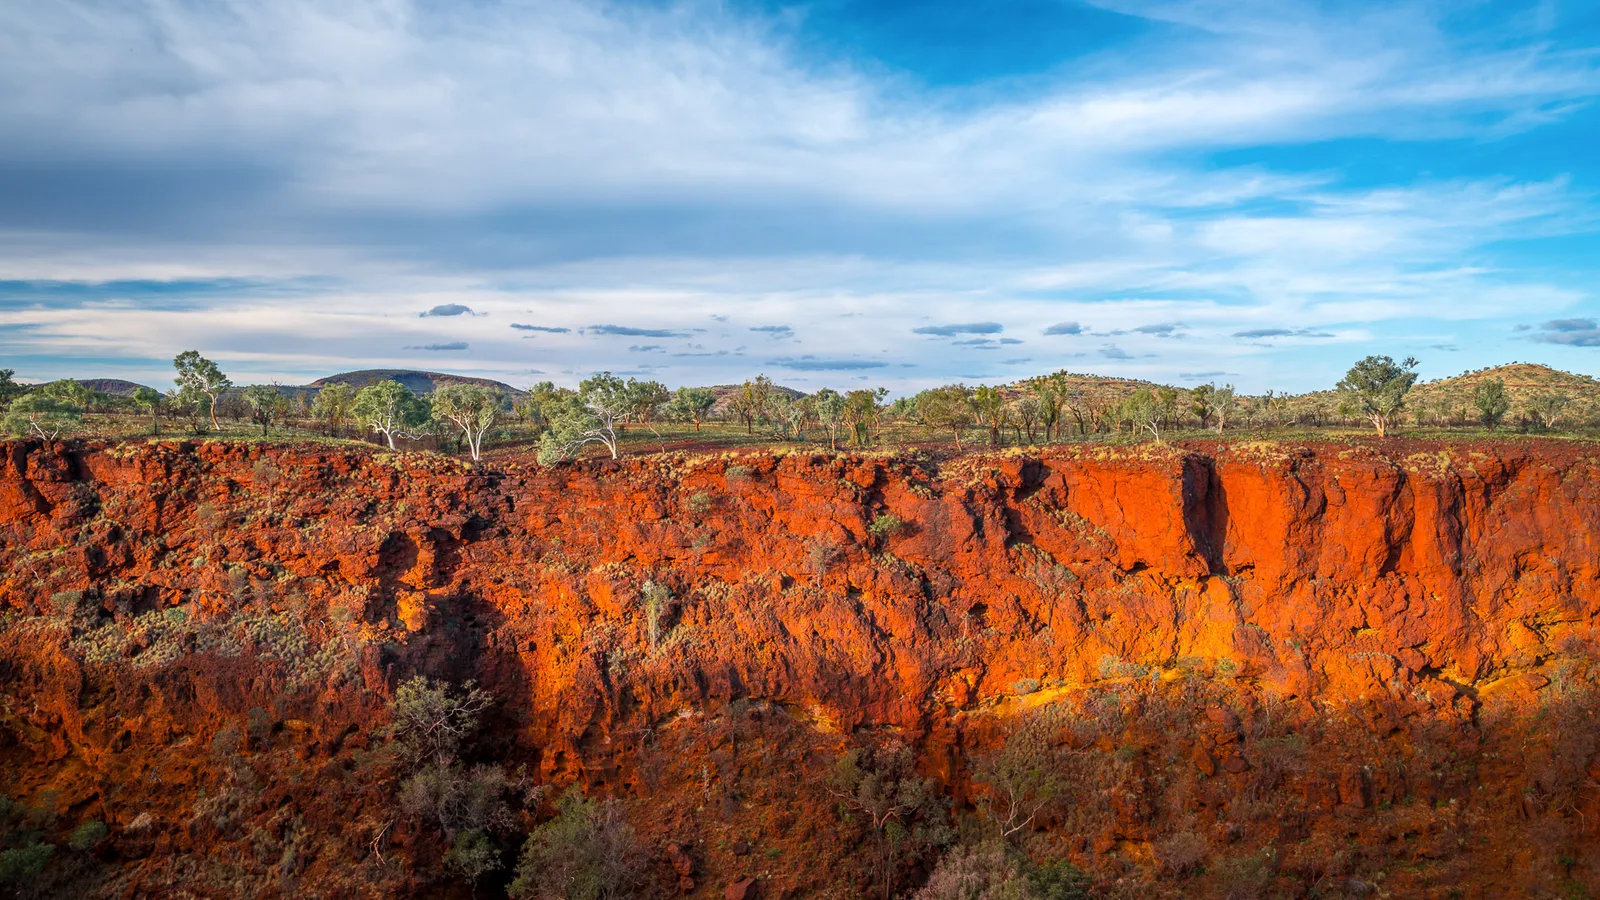 Is the Pilbara in Australia the oldest place on Earth?